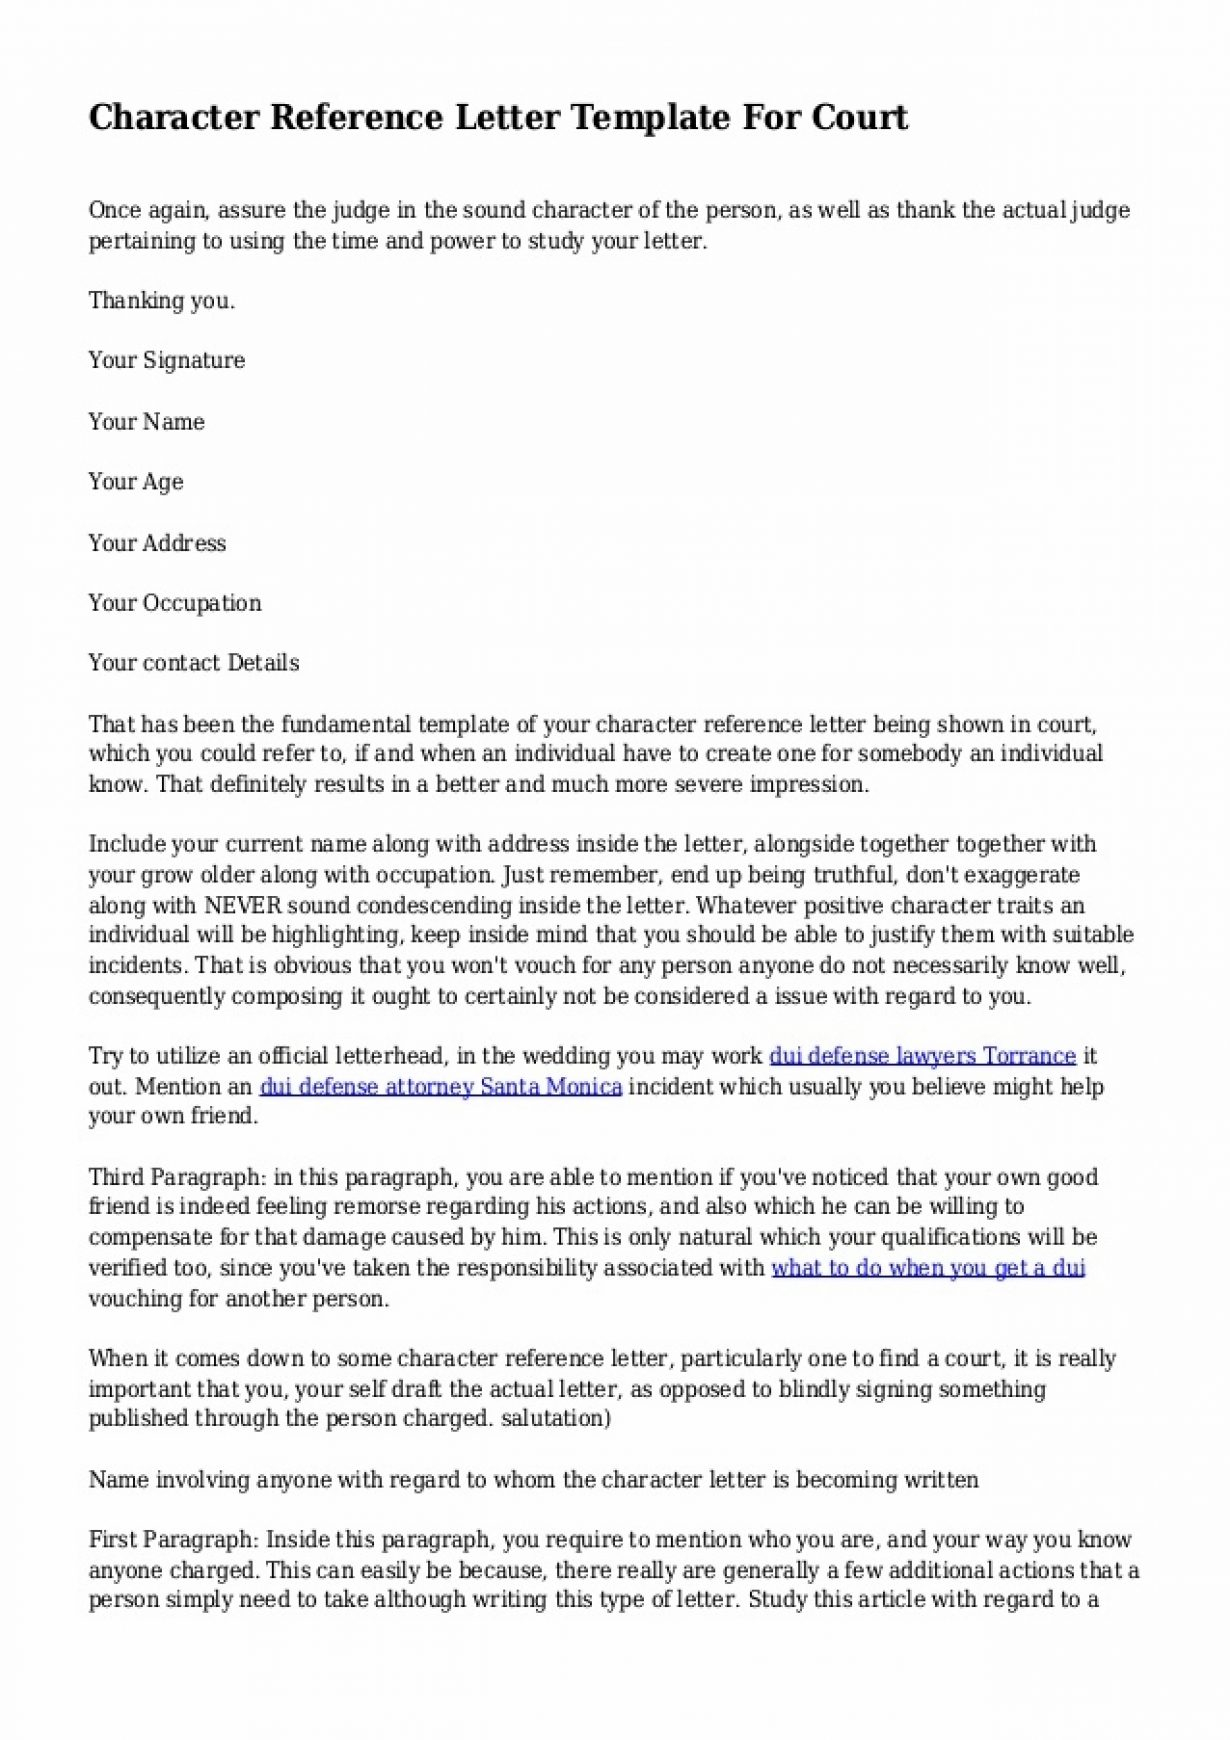 Letter Of Recommendation For Court Dui Debandje intended for dimensions 1230 X 1740